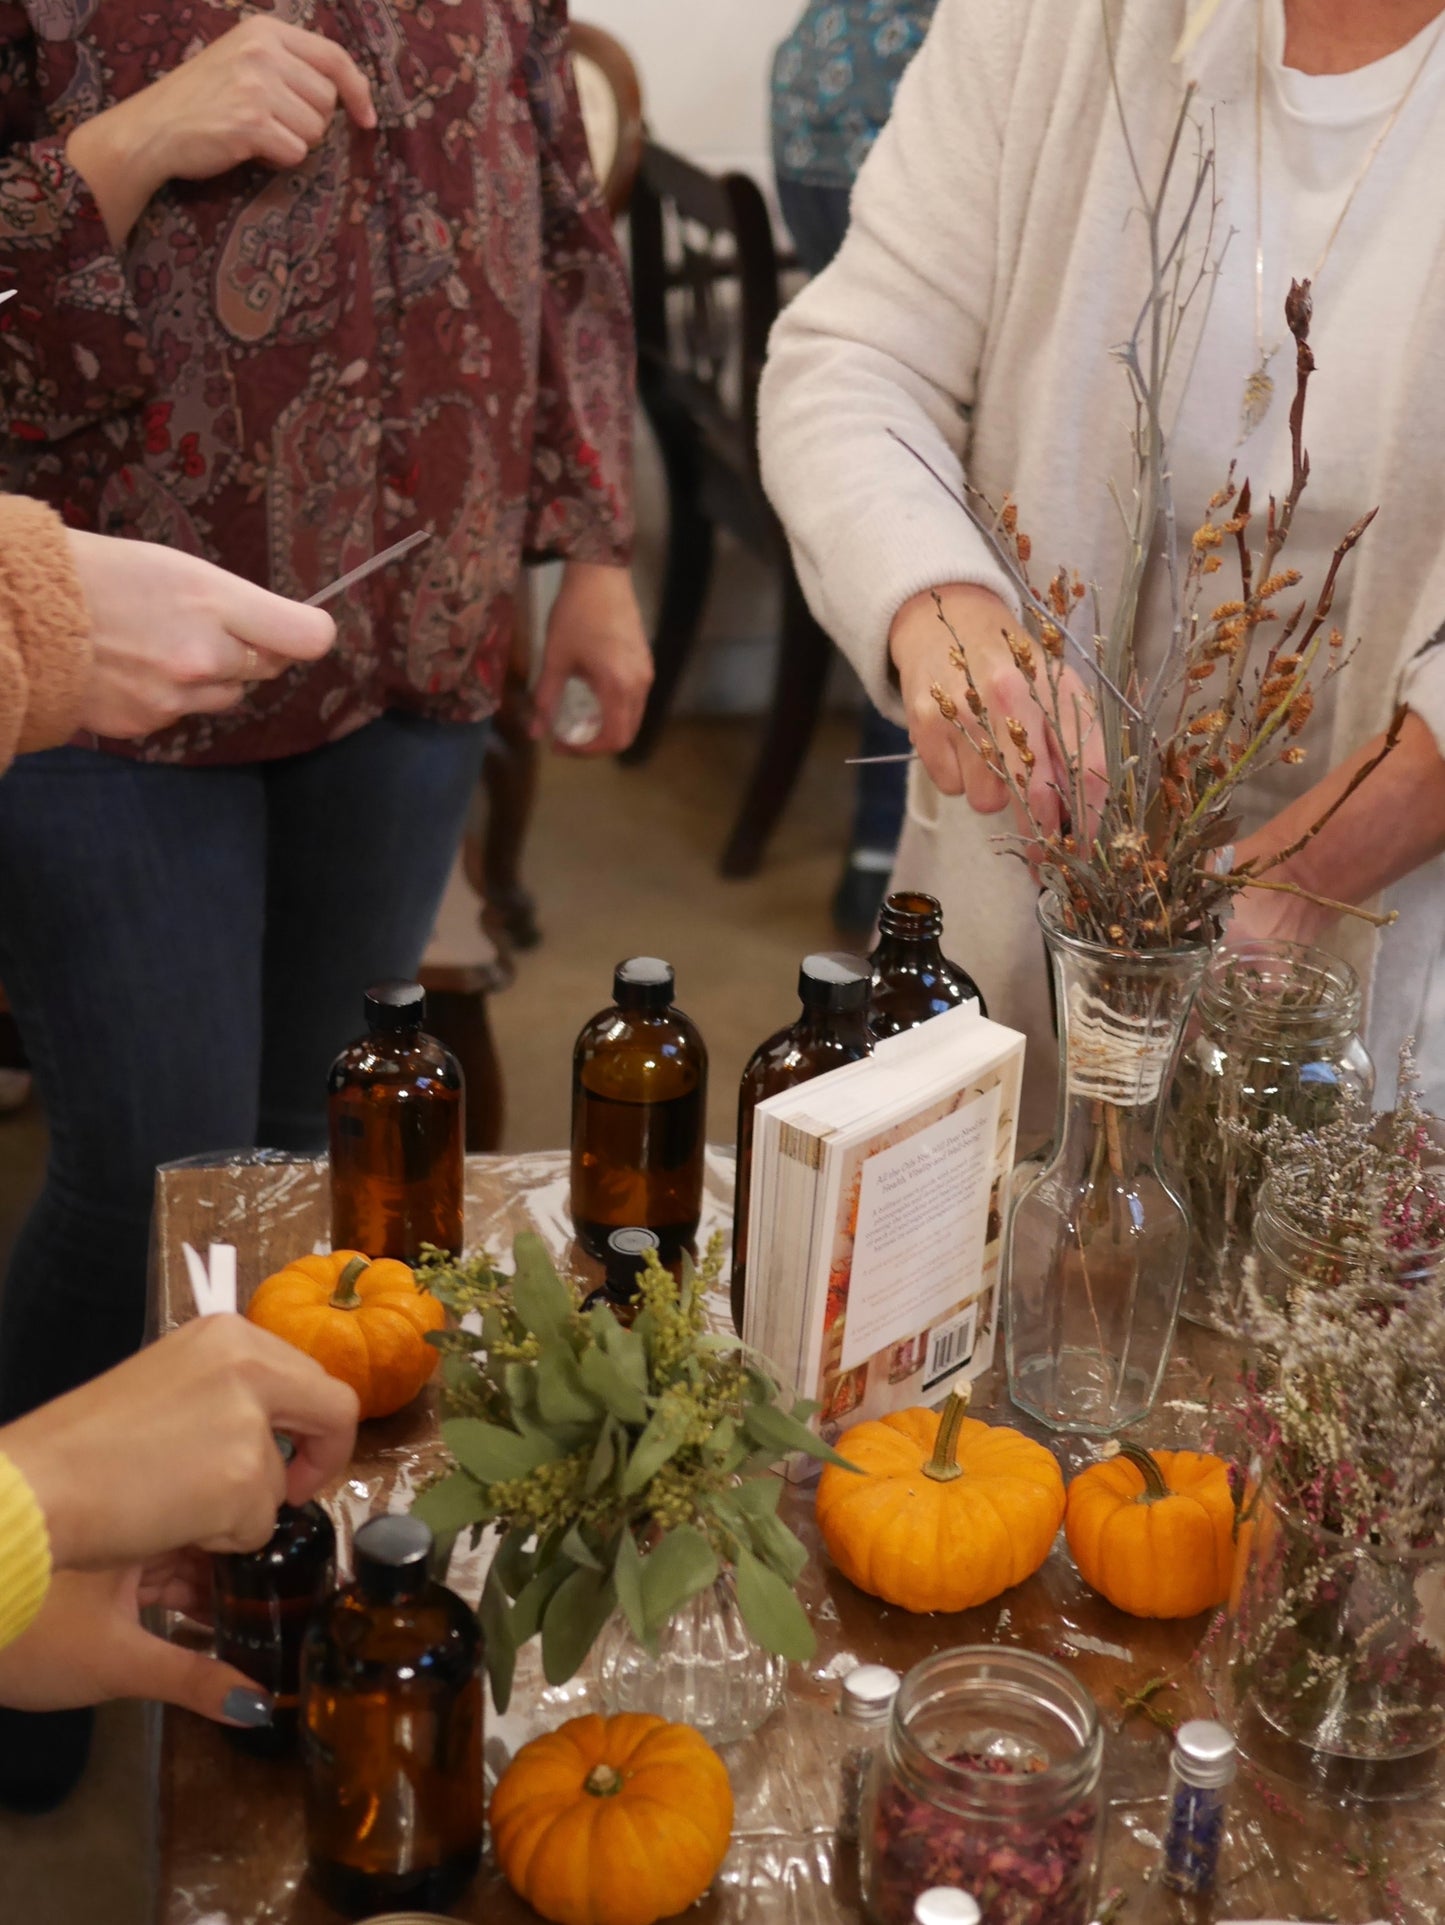 Group of women smelling scents from amber glass bottles and pumpkin fall foliage